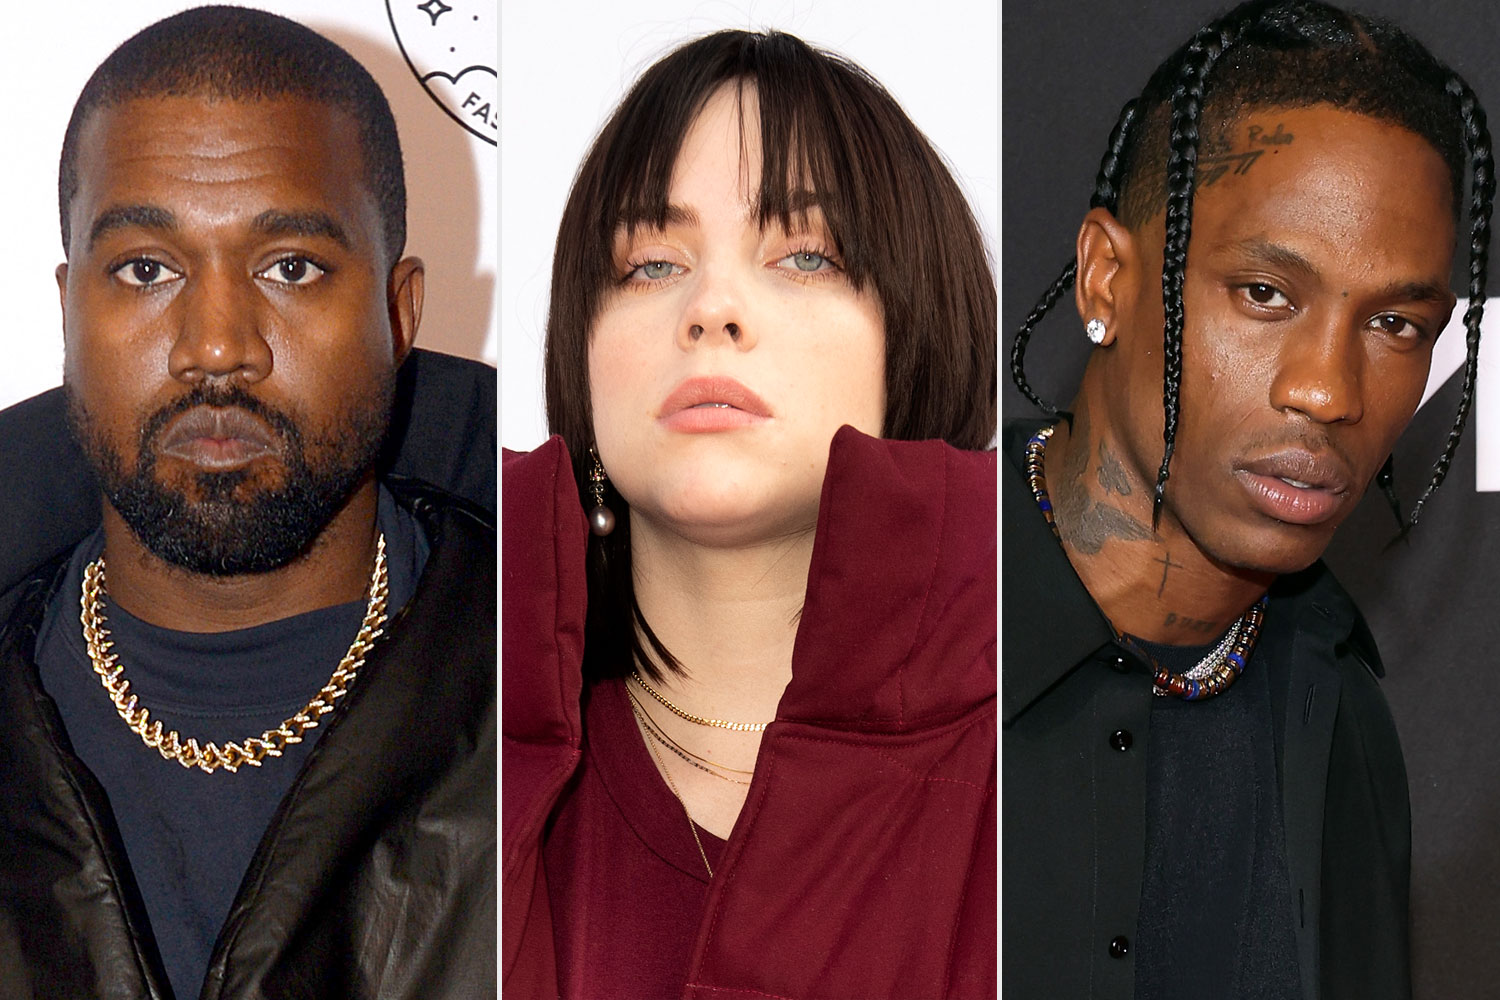 Kanye wants Billie Eilish to apologize to Travis Scott or he’ll pull out of Coachella